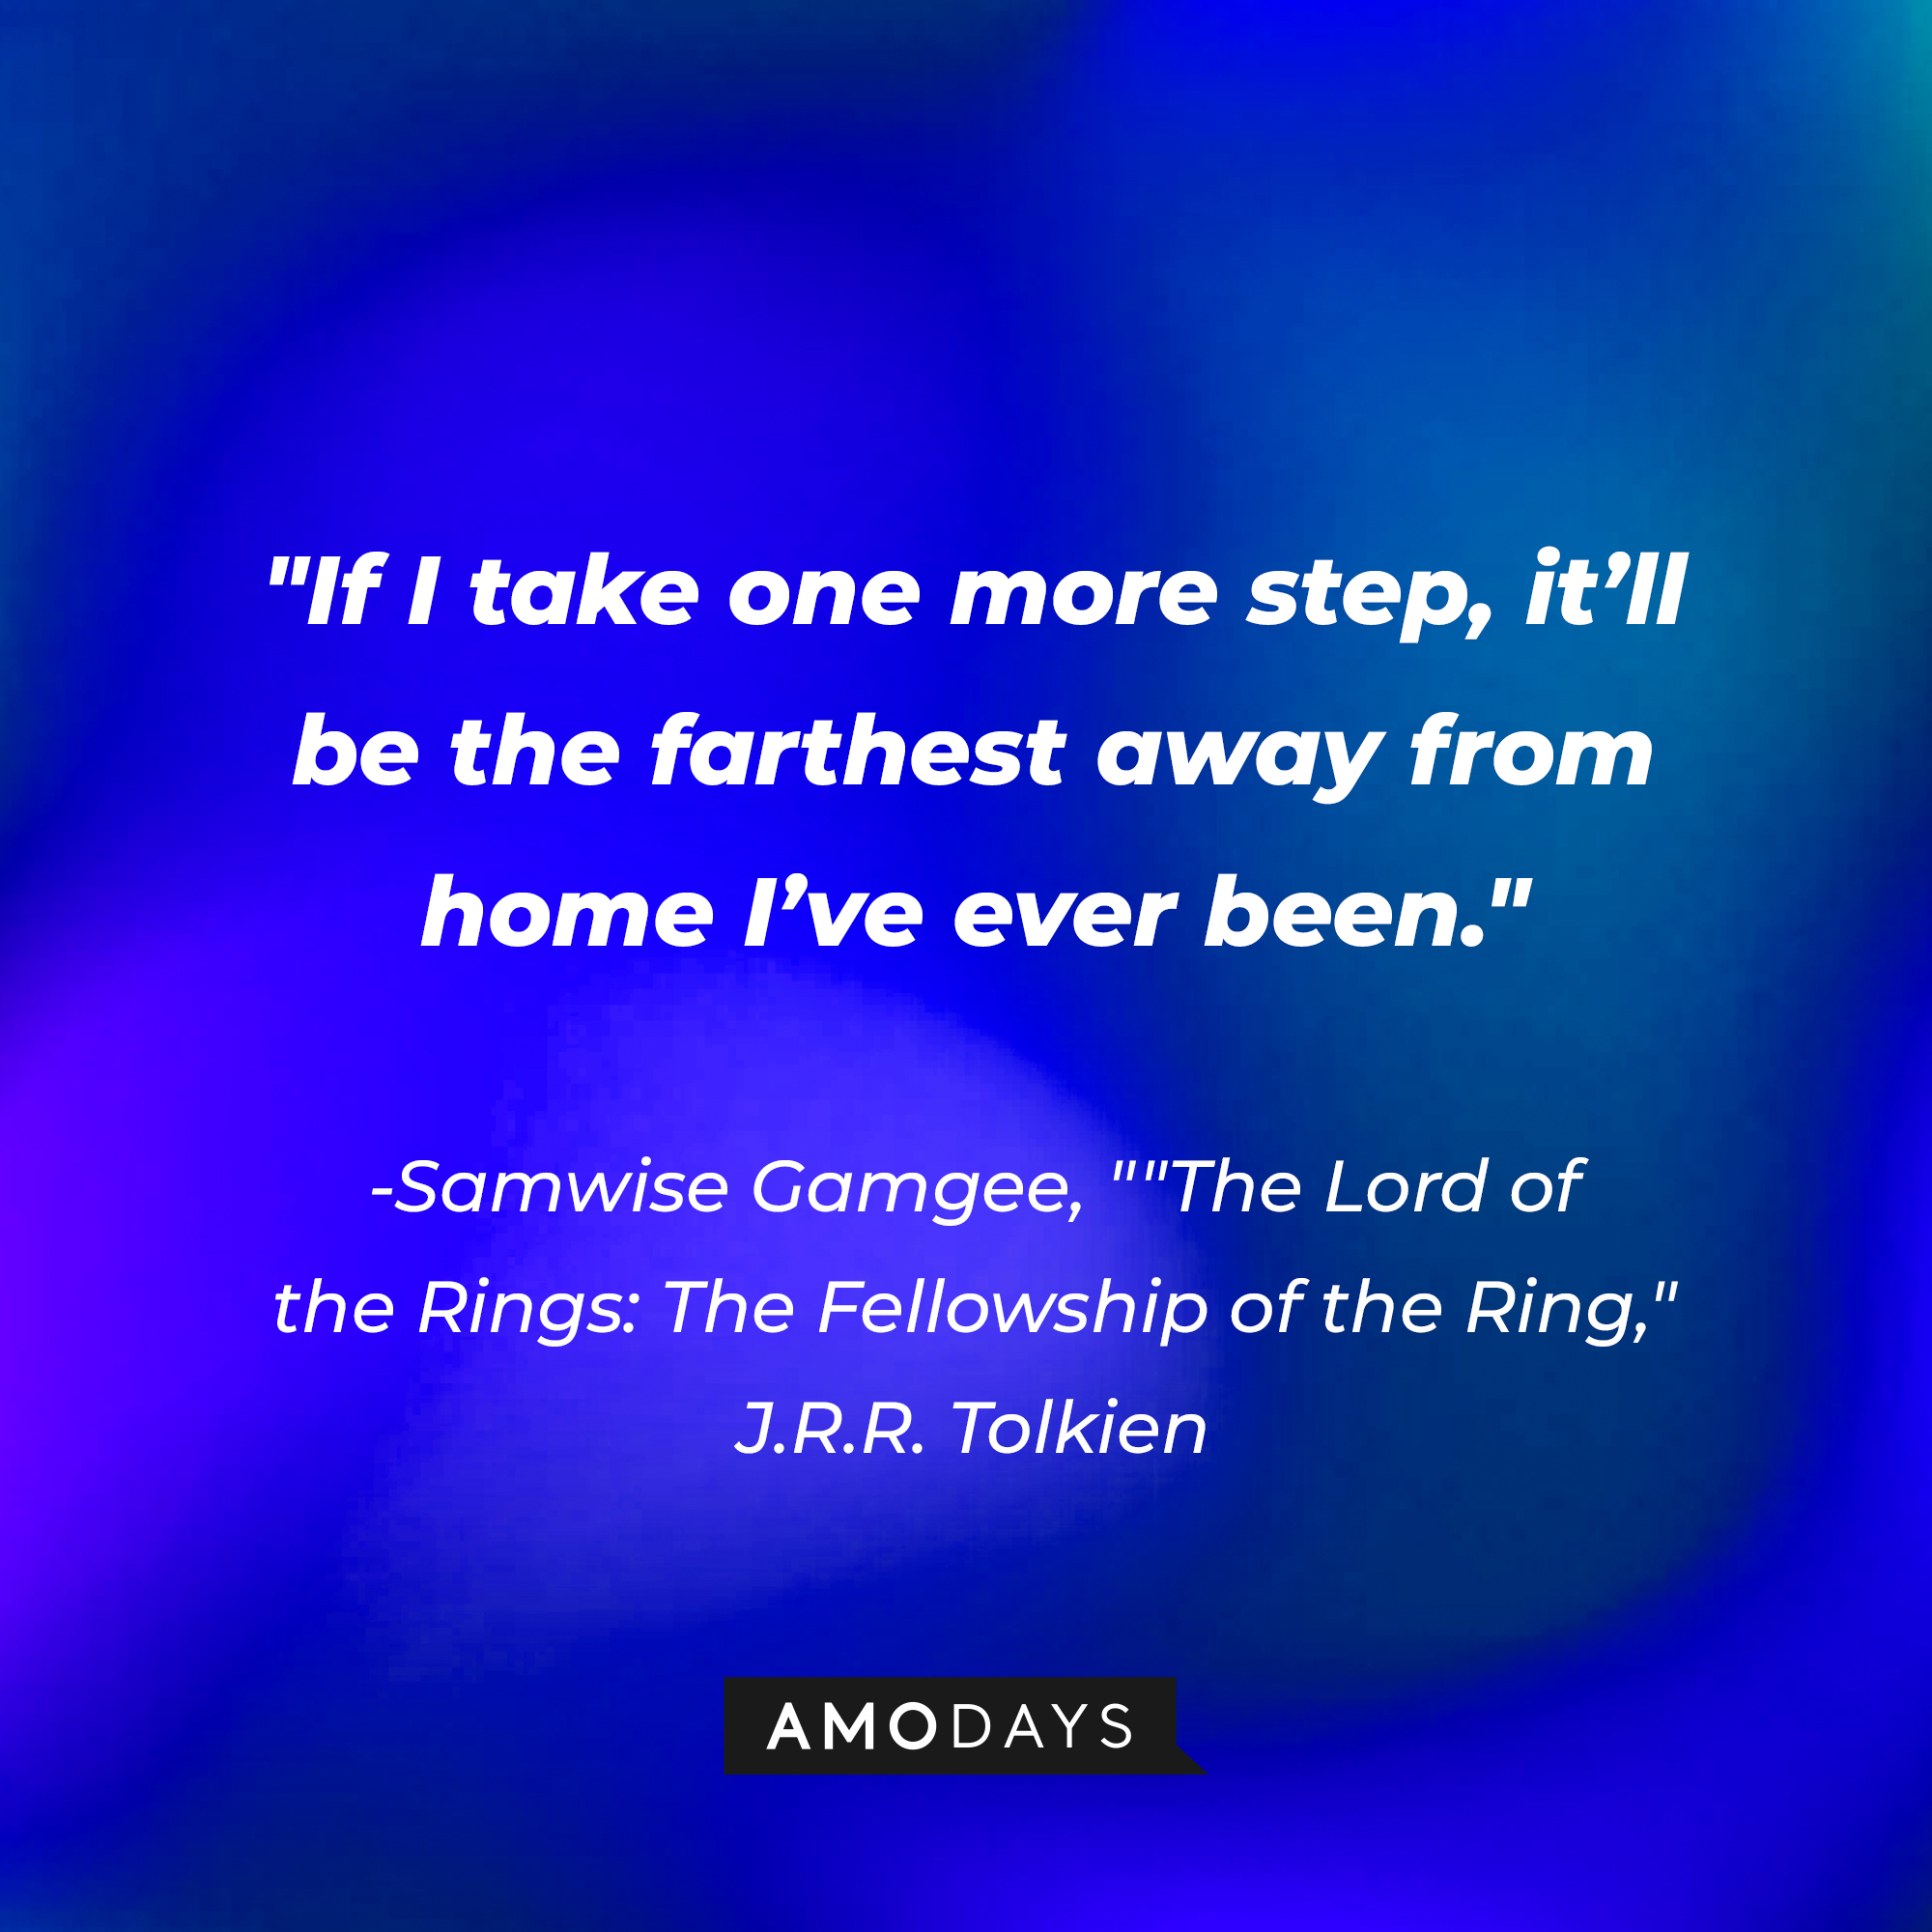 Samwise Gamgee’s quote from “The Lord of the Rings: The Fellowship of the Ring” by J.R.R Tolkien: “If I take one more step, it’ll be the farthest away from home I’ve ever been.” | Source: AmoDays